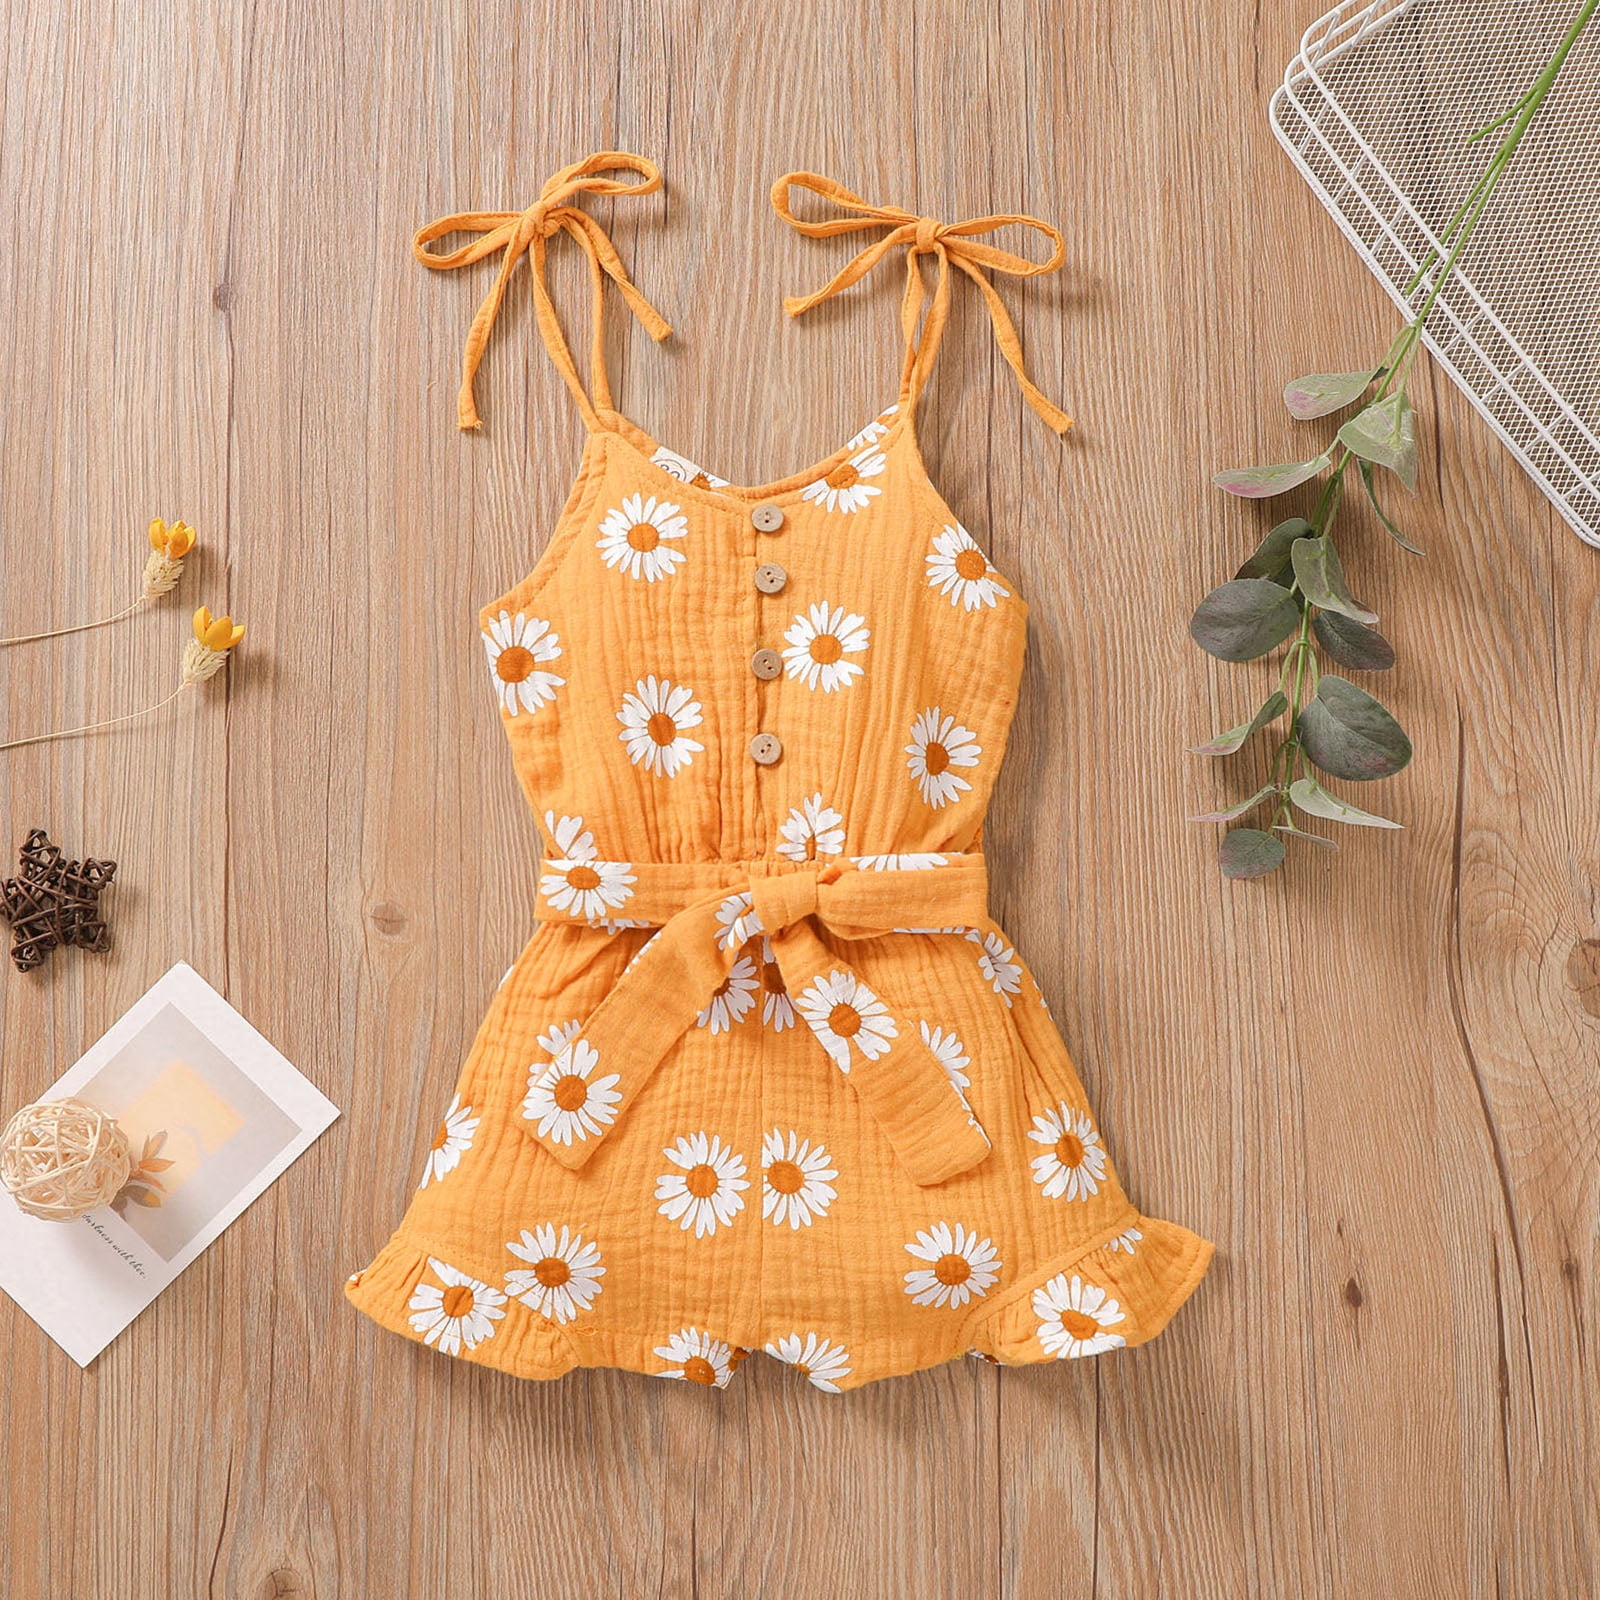 Newborn Infant Baby Girls Sleeveless Floral Romper Jumpsuit Bodysuit  Outwith Headband: Buy Online at Best Price on Snapdeal